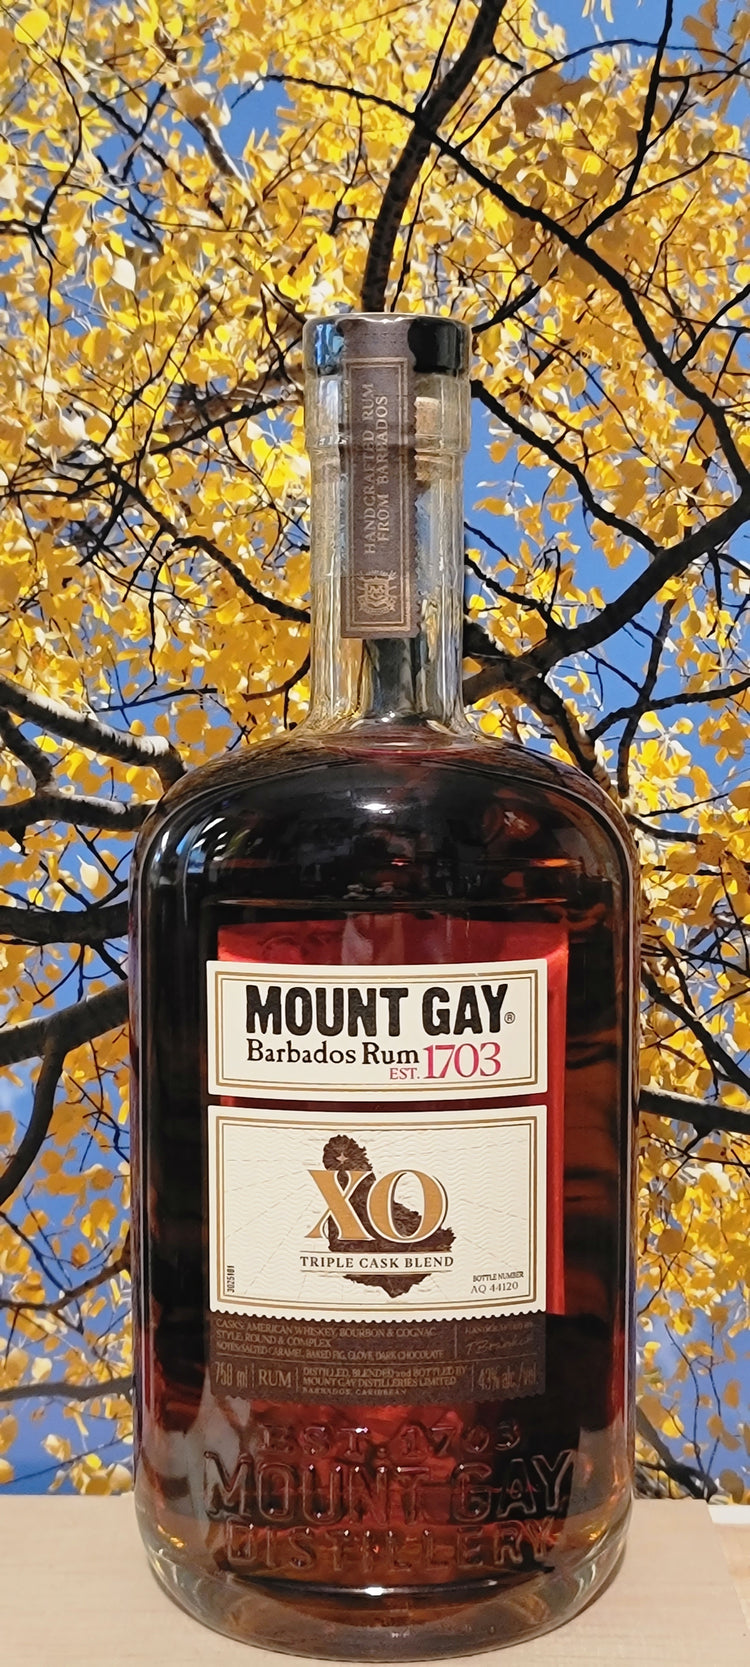 Mount gay extra old